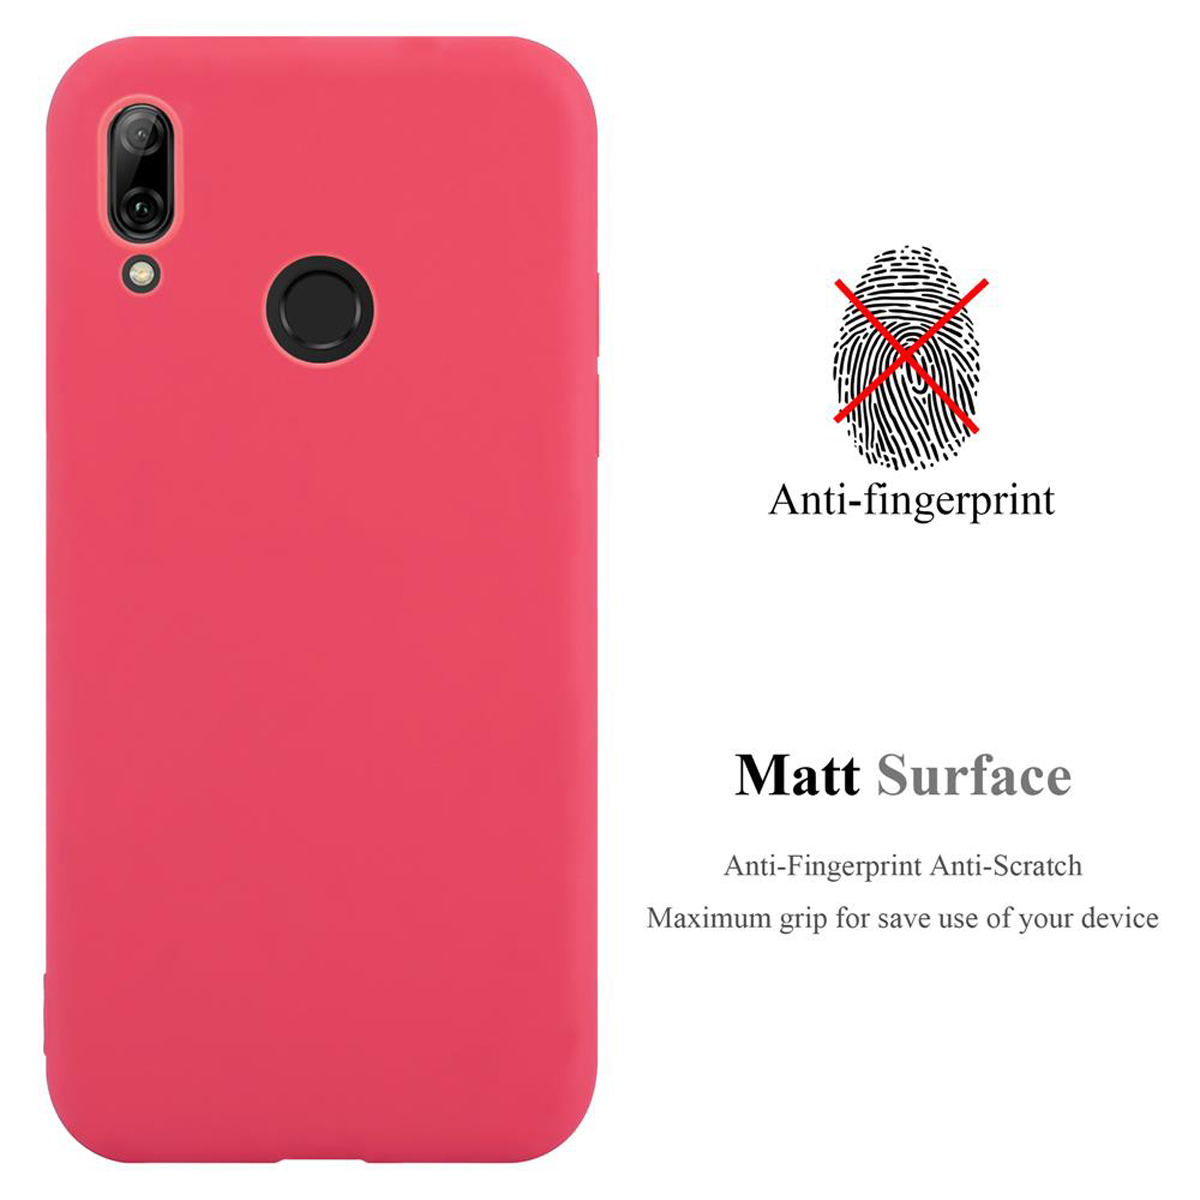 im / LITE 2019, ROT Style, P CADORABO Huawei TPU SMART Hülle Candy 10 Honor, CANDY Backcover,